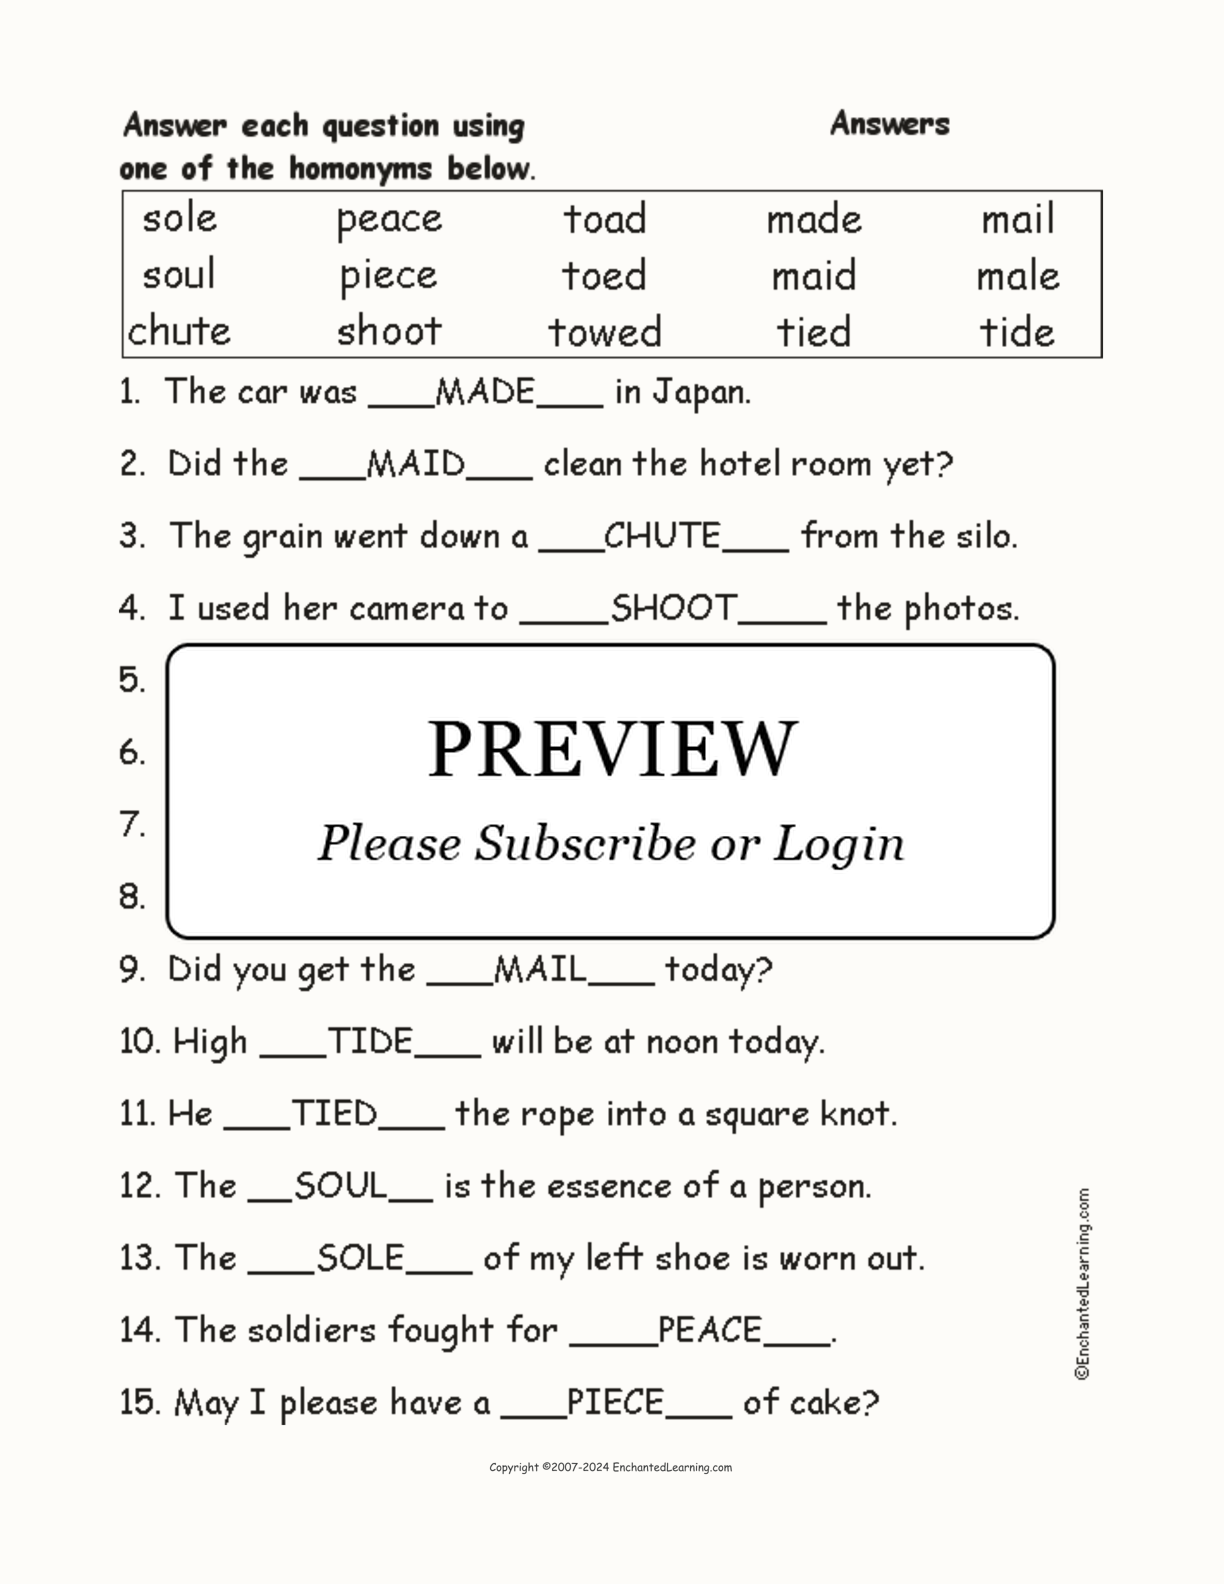 Homonyms Spelling Word Questions #9 interactive worksheet page 2